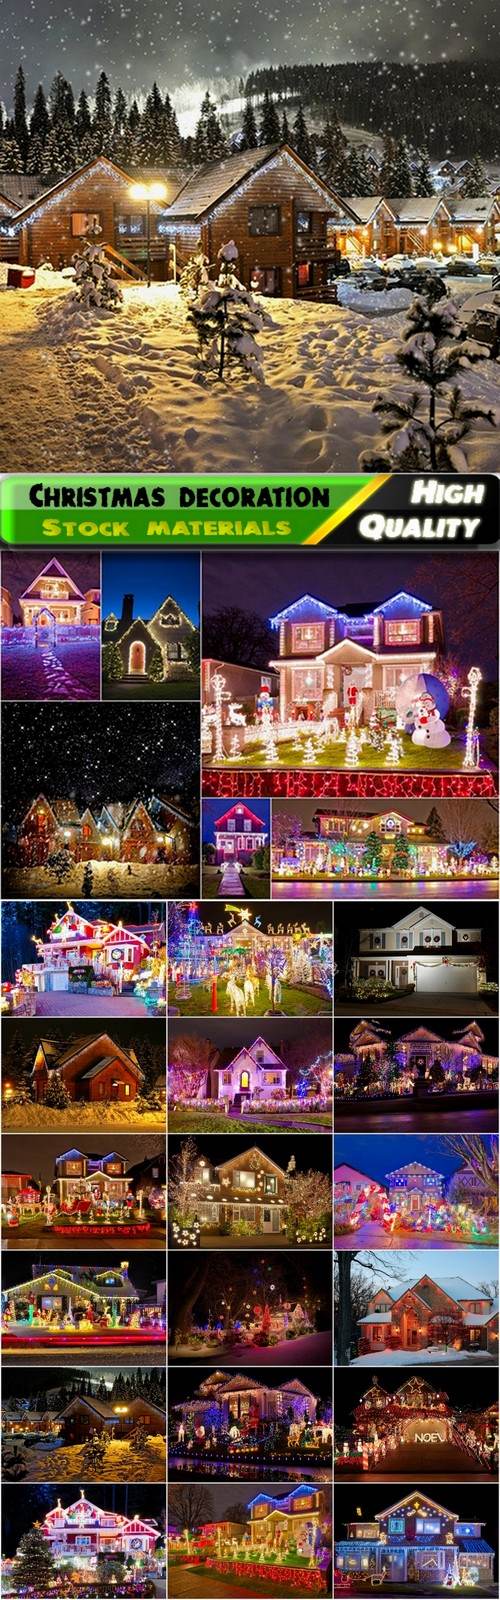 Home exteriors decorated Christmas lights - 25 HQ Jpg